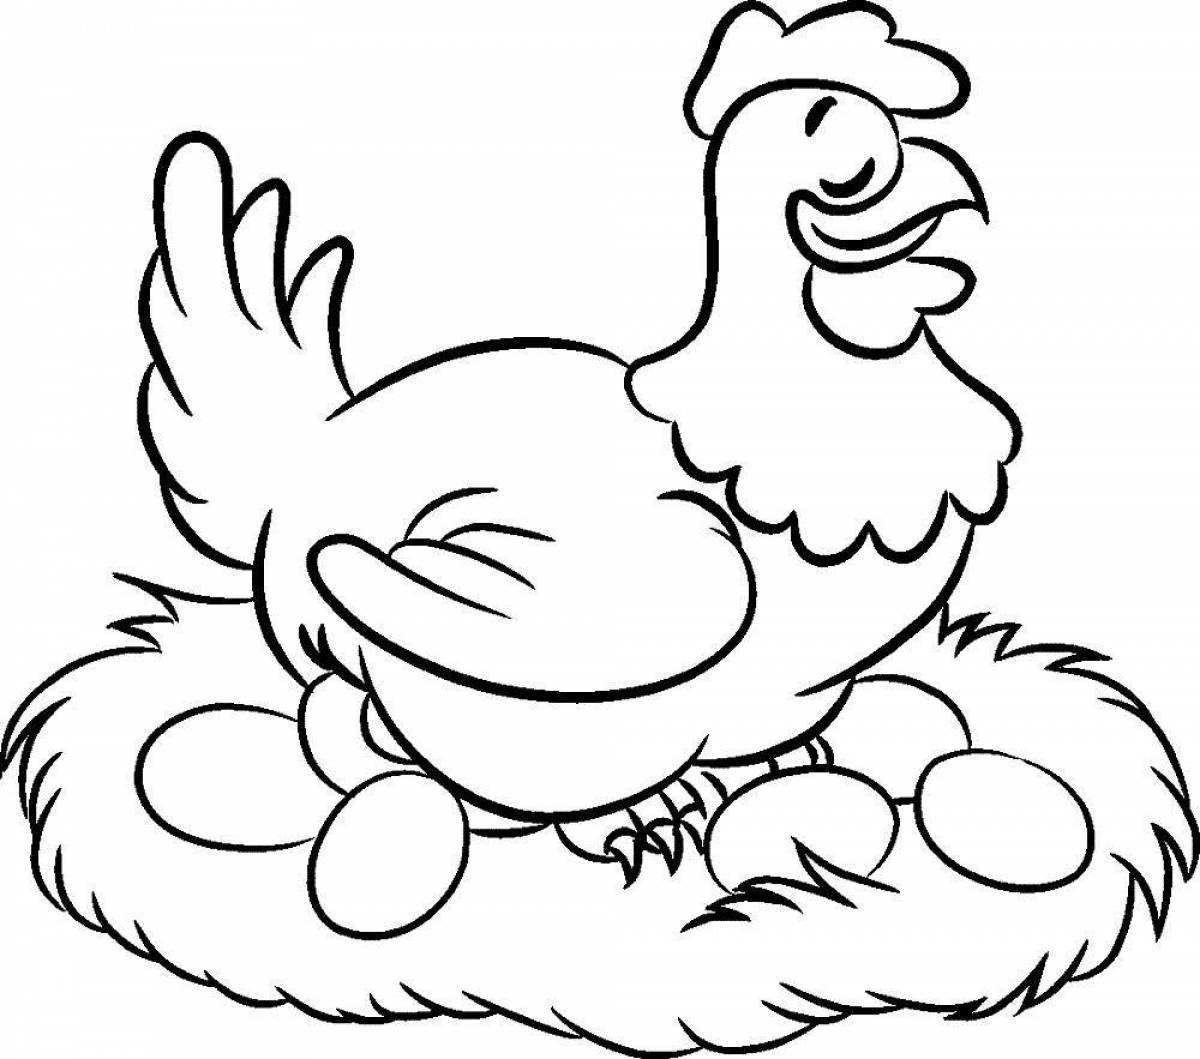 Coloring page shining chickens